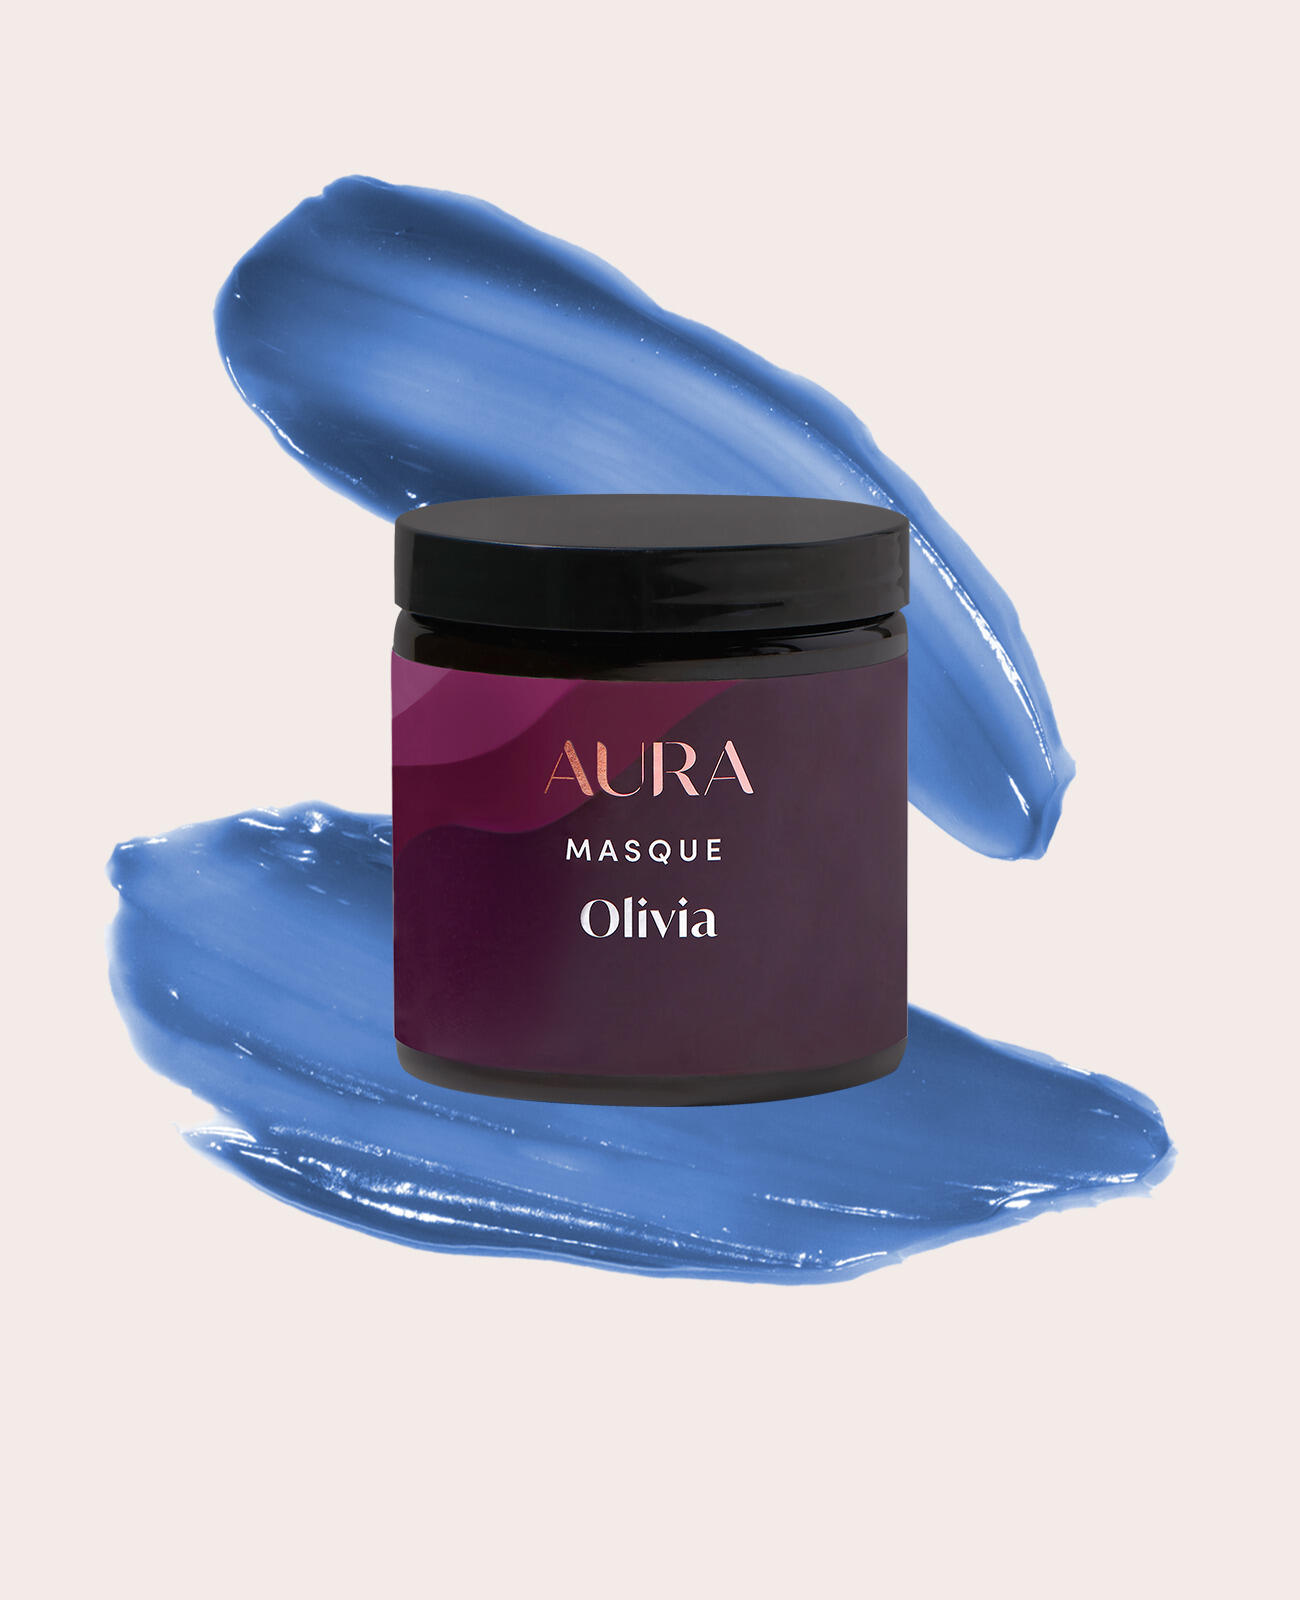 AURA personalized hair mask with pacific periwinkle pigment